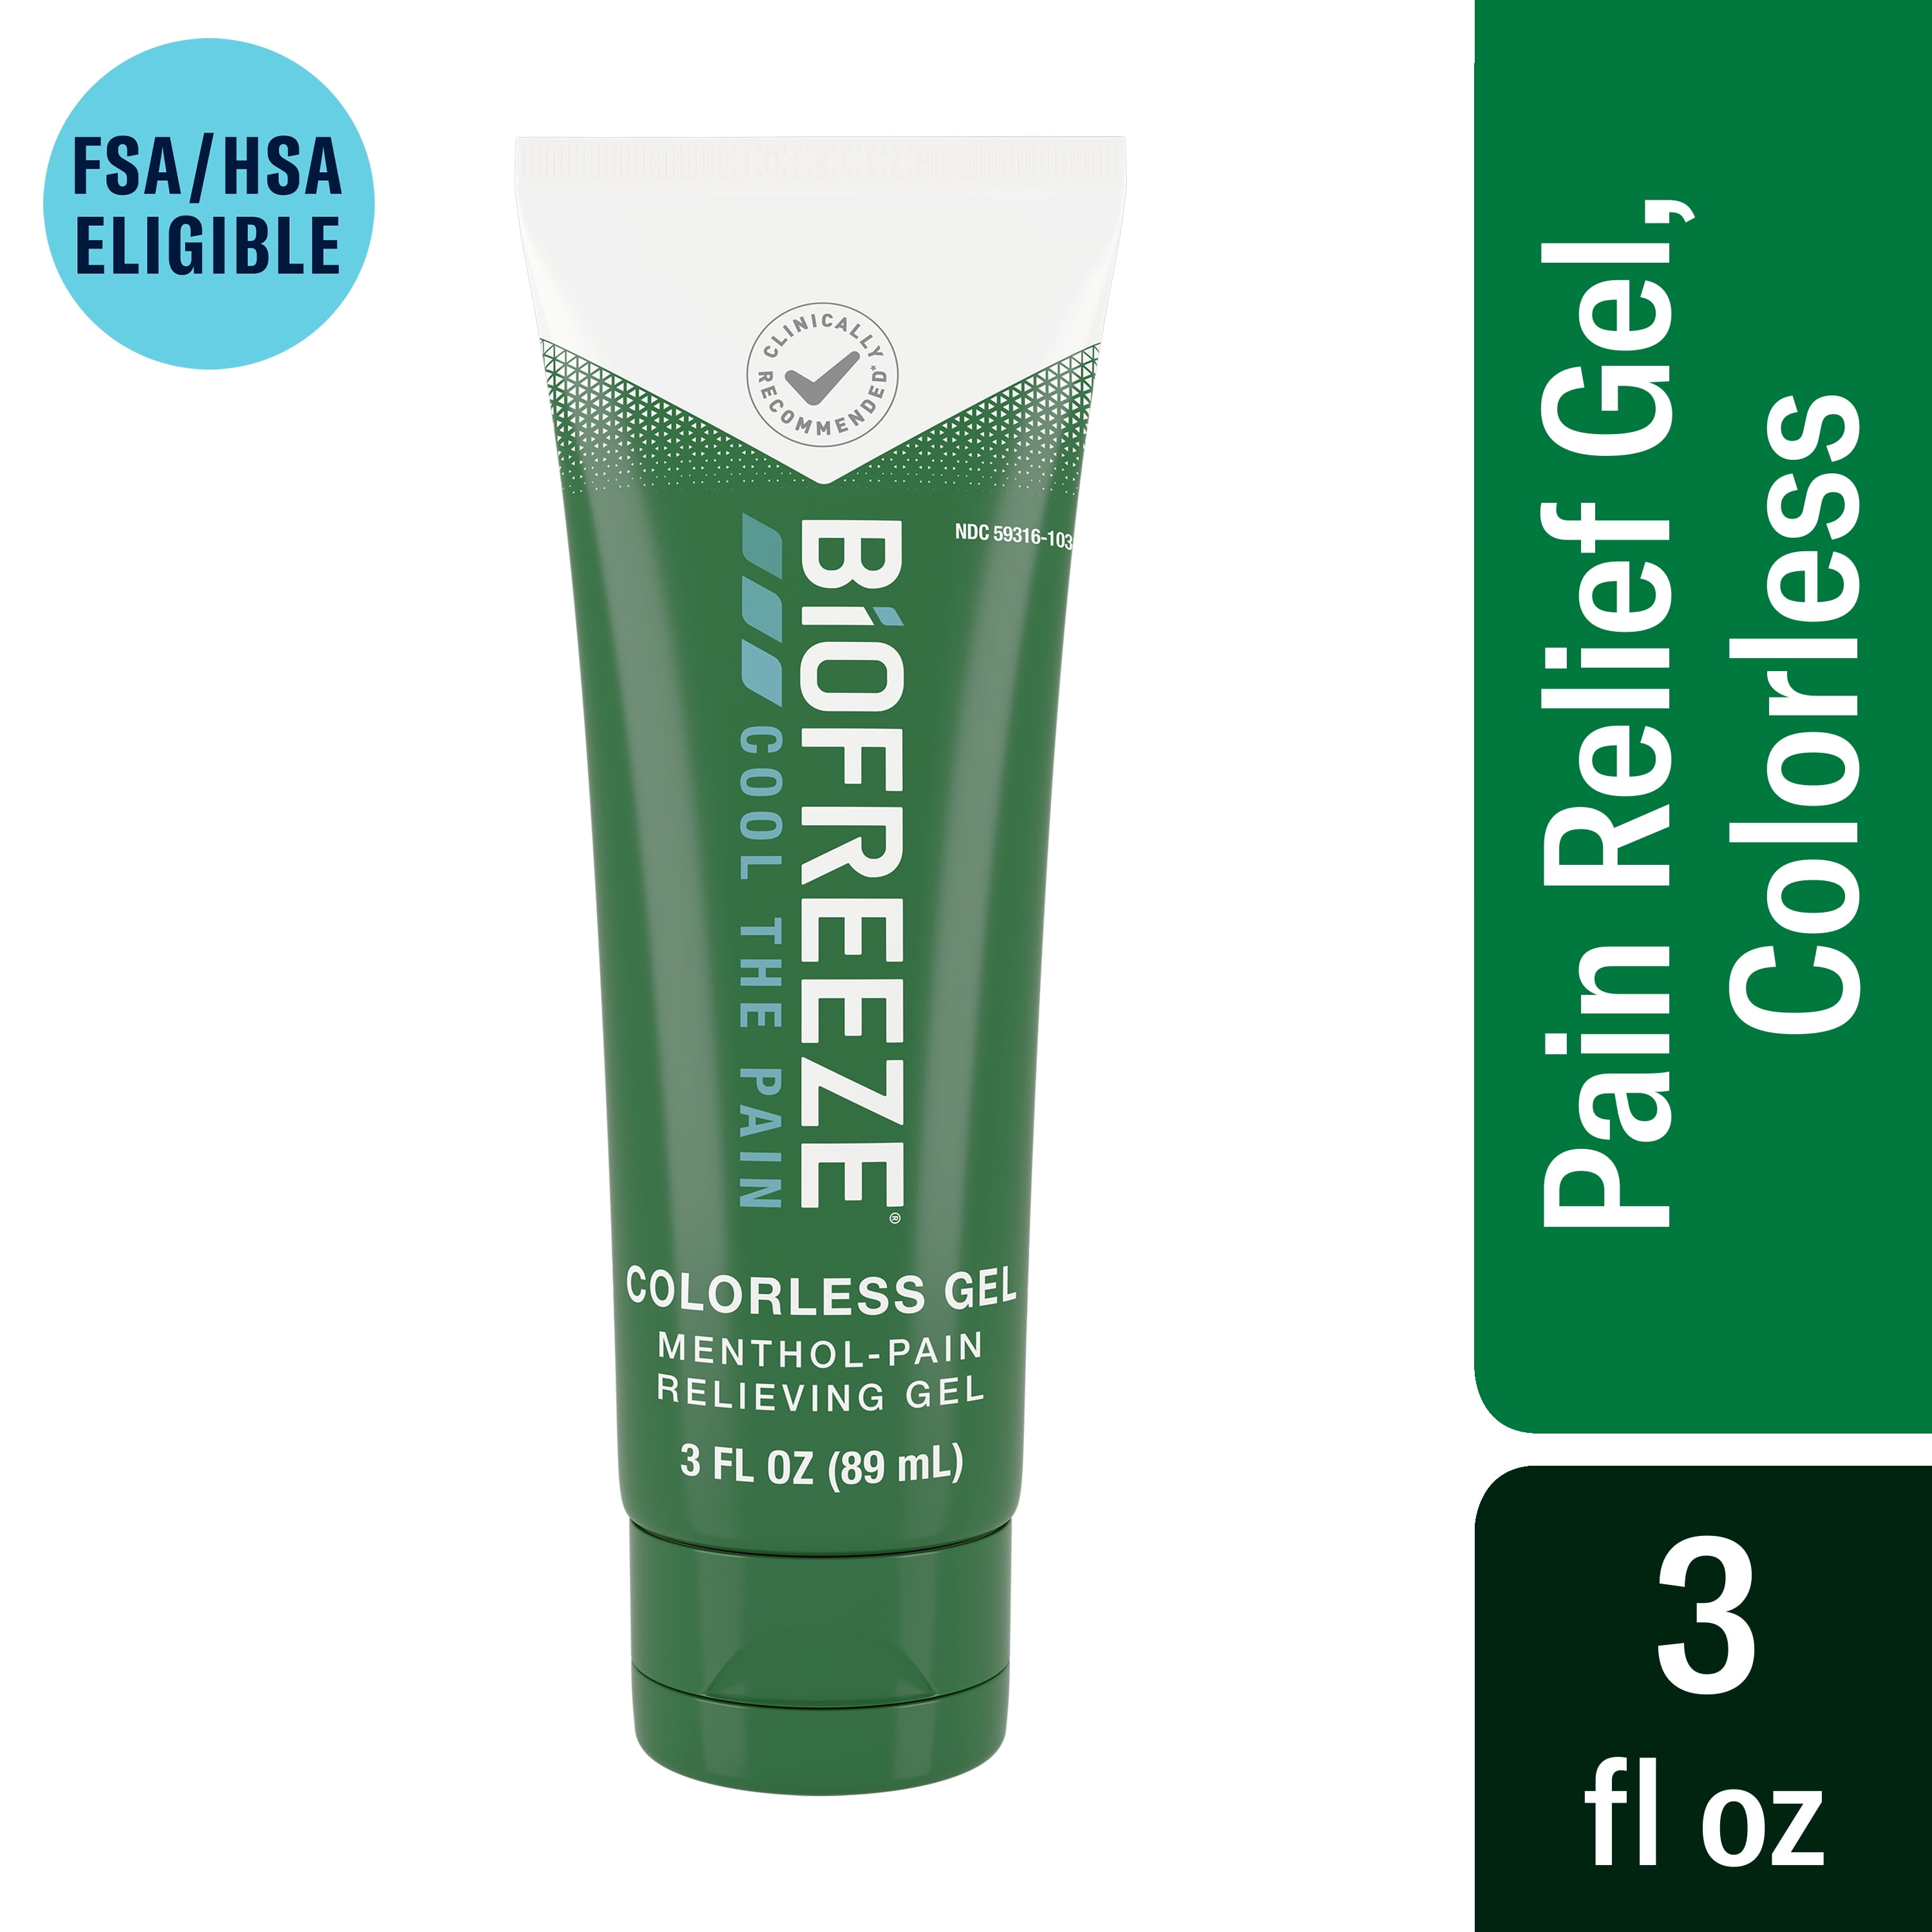 Biofreeze Menthol Pain Relieving Gel Colorless Gel 3 FL OZ Tube For Pain Relief Associated With Sore Muscles, Arthritis, Simple Backaches, And Joint Pain (Packaging May Vary)